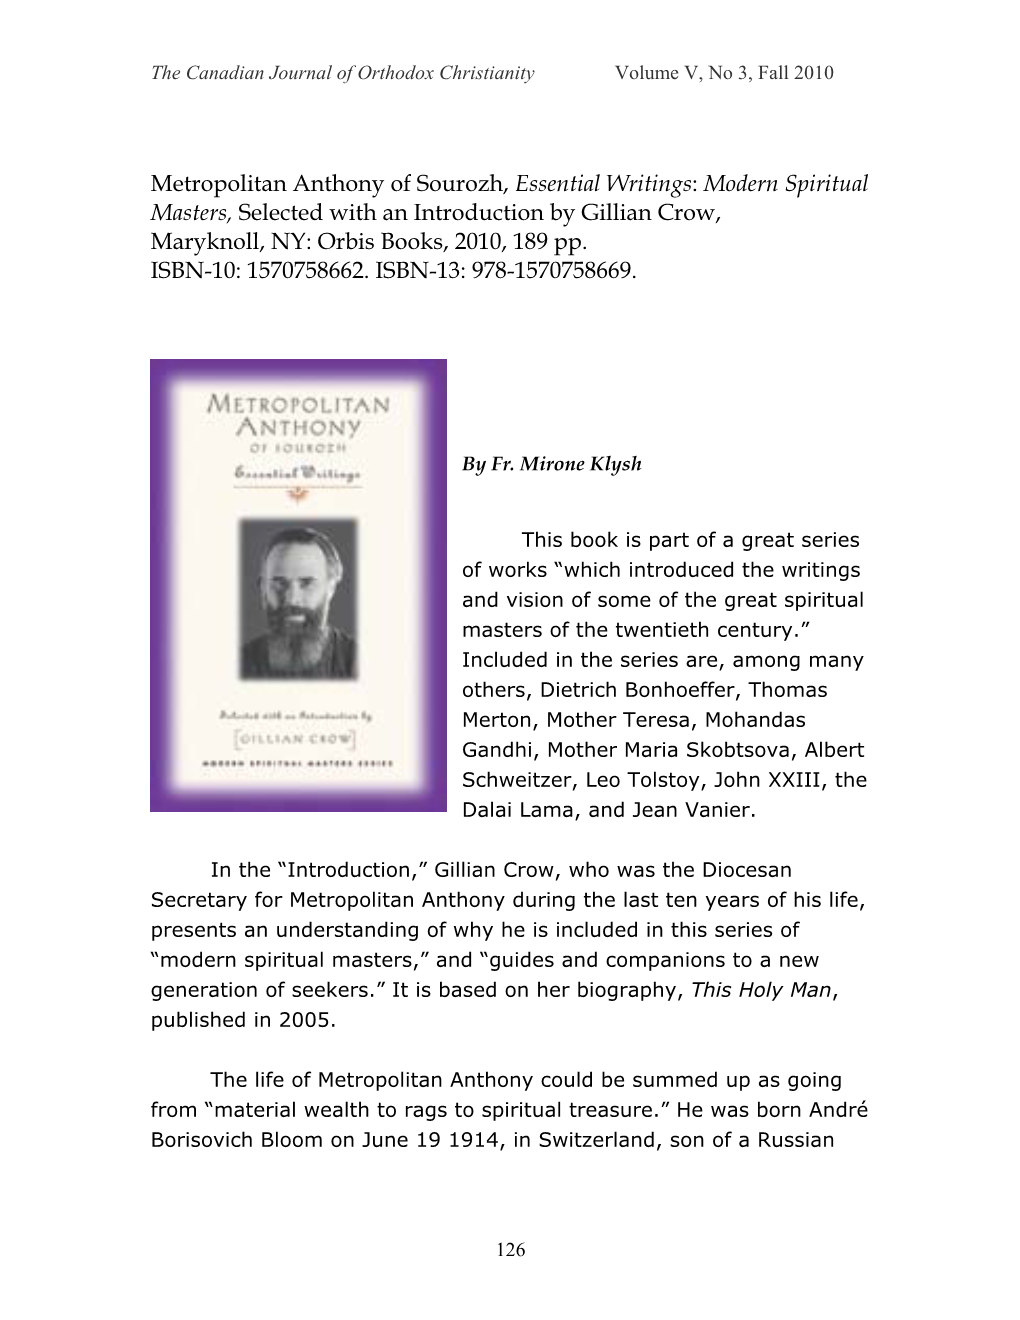 Metropolitan Anthony of Sourozh, Essential Writings: Modern Spiritual Masters, Selected with an Introduction by Gillian Crow, Maryknoll, NY: Orbis Books, 2010, 189 Pp